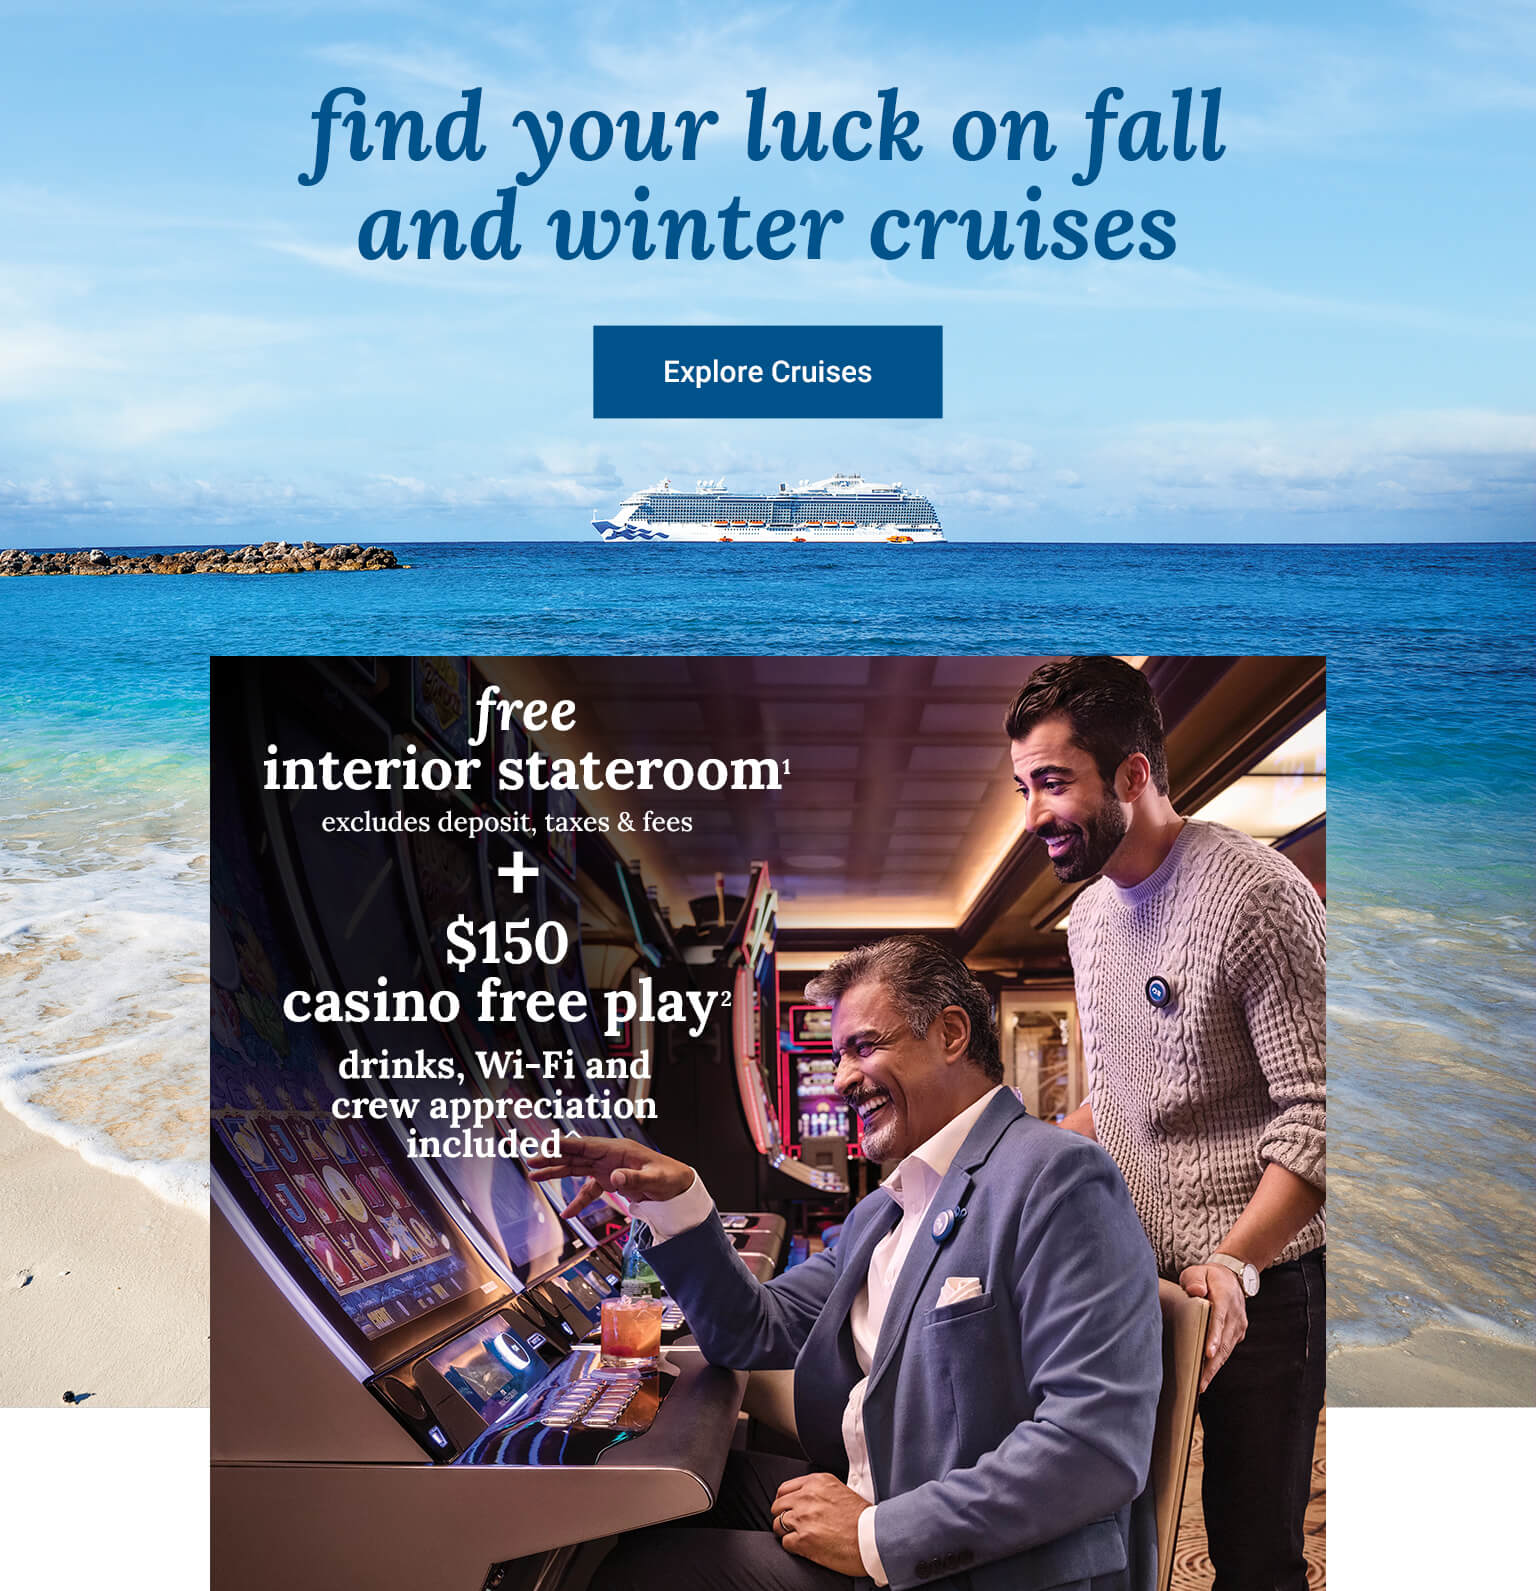 free interior stateroom + $150 casino free play + drinks, Wi-Fi & crew appreciation included. Click here to book. 